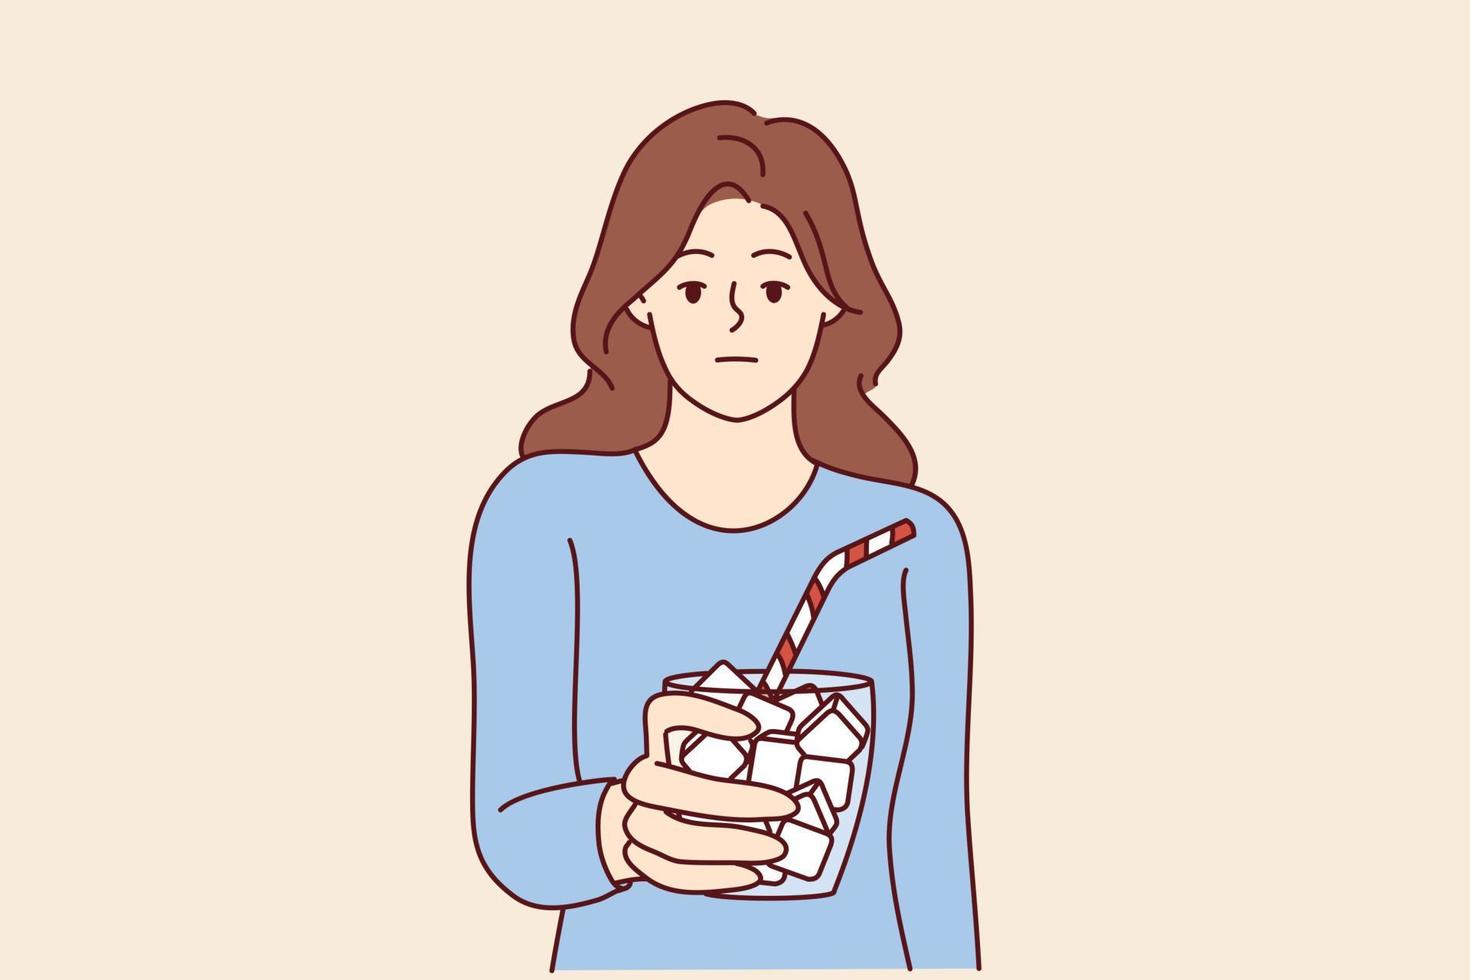 Emotionless girl holds glass full of sugar with straw symbolizing unhealthy nutrition leading to diabetes. Woman drinking drinks with too much sugar needs diet to avoid insulin problems vector